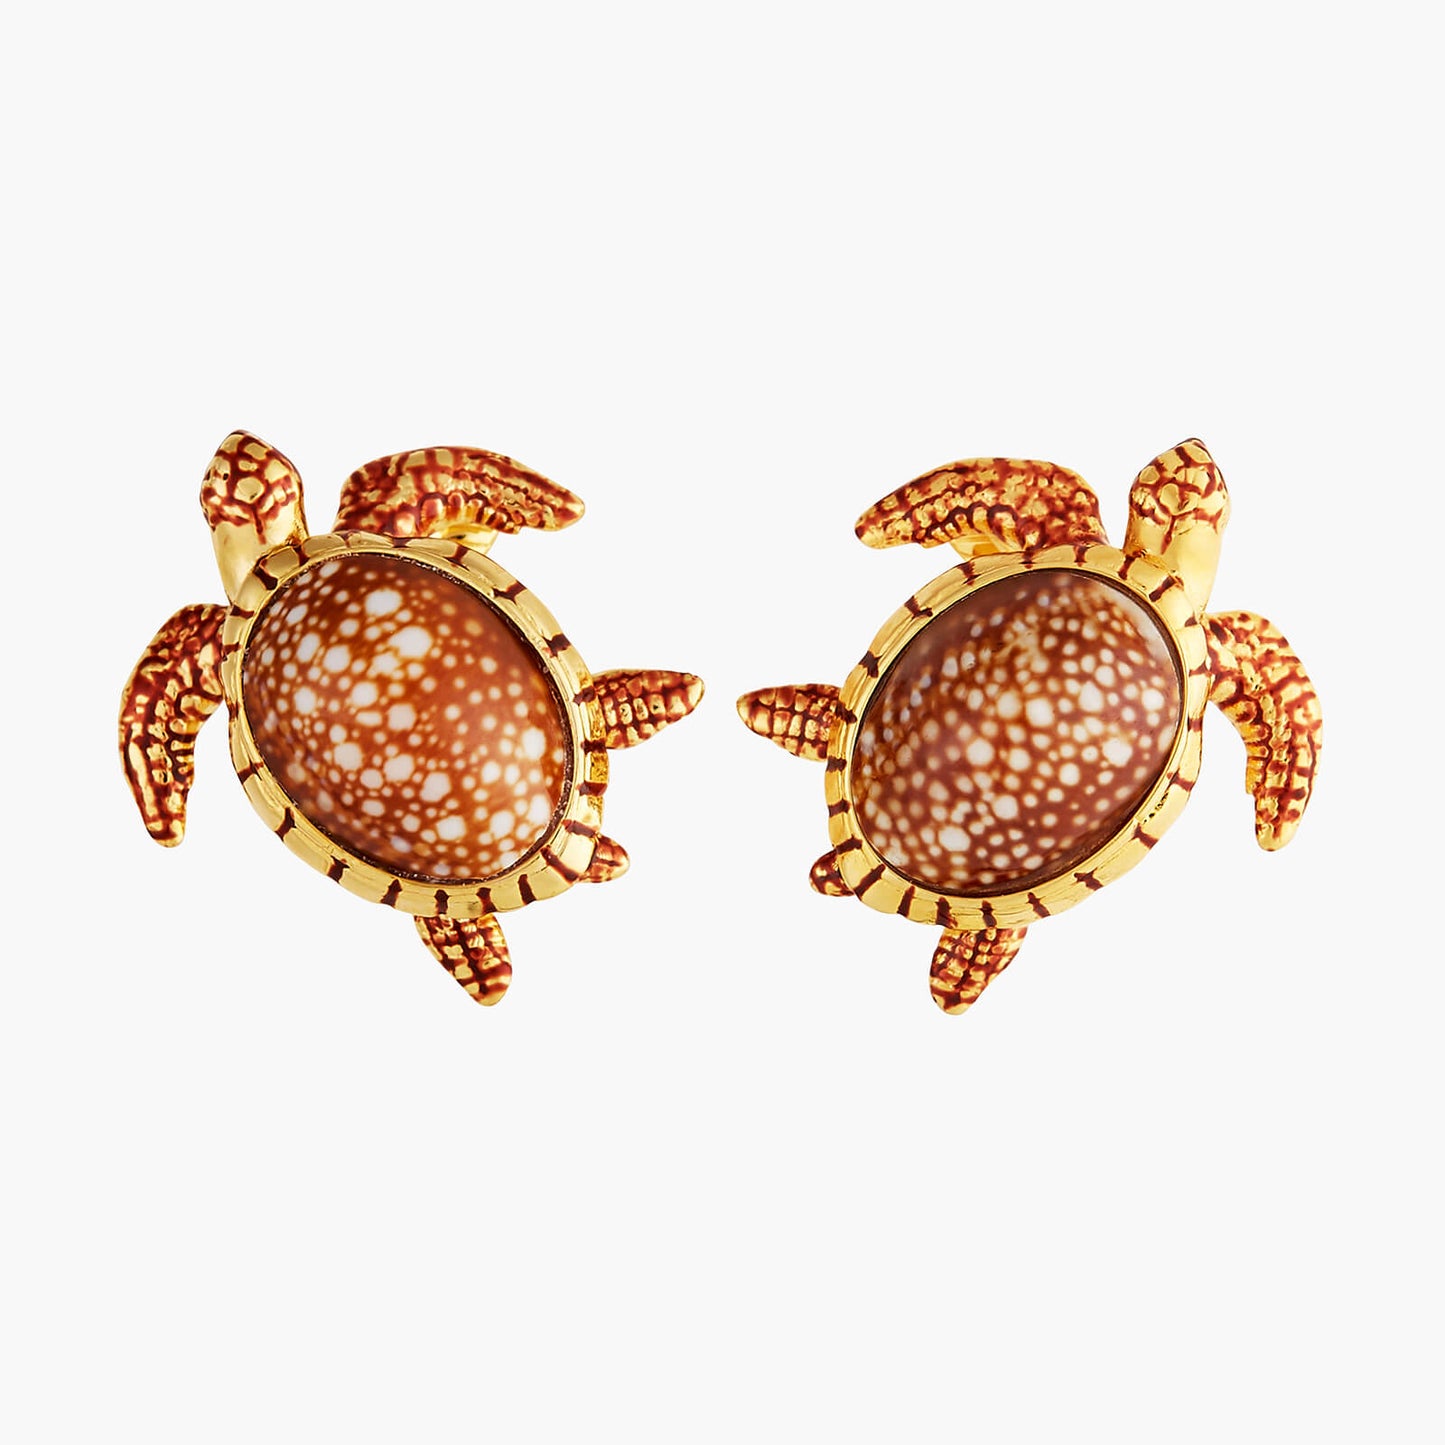 Turtles And Speckled Shells Earrings | AOGL1081